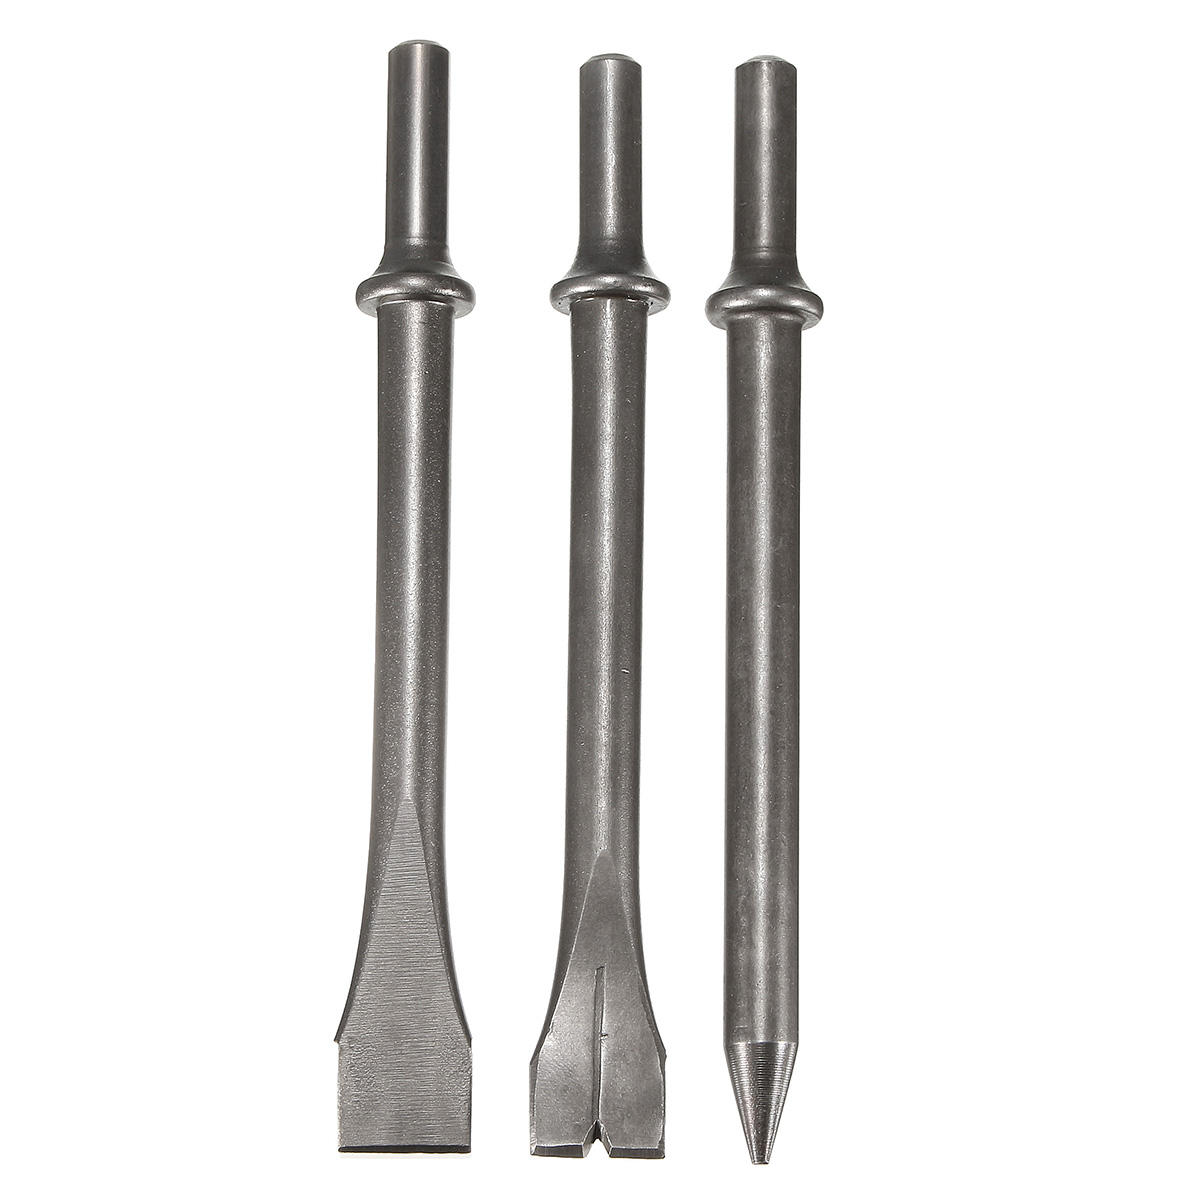 3 stuks 7 inch lengte luchthamers punch chipping beitel set ronde bar tool accessoire: